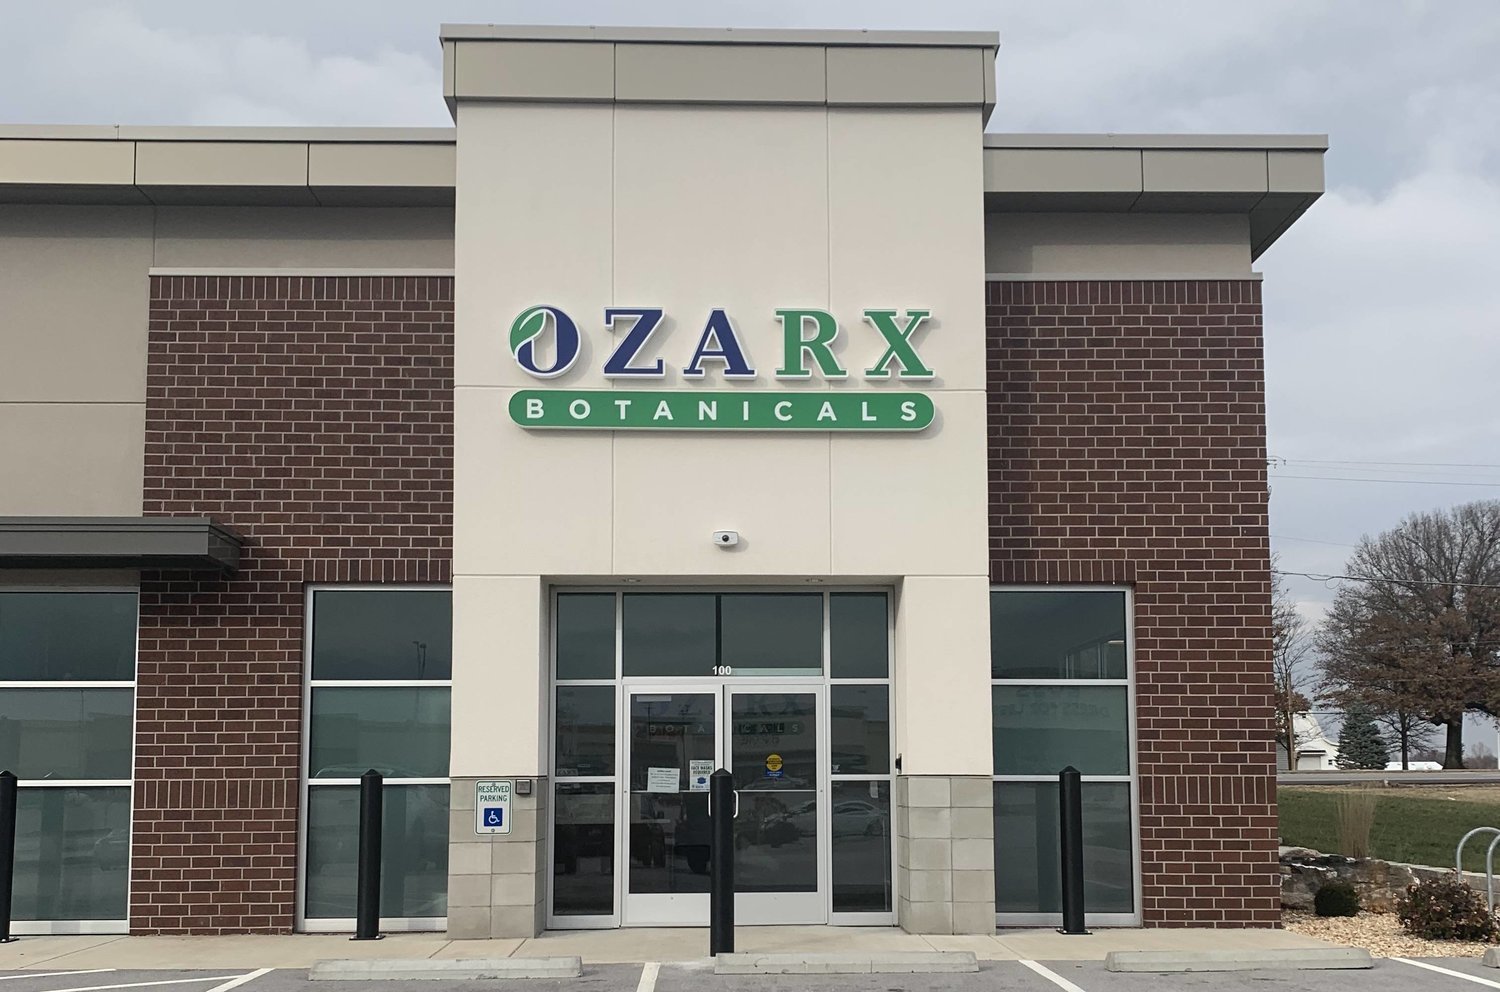 The dispensary opened in early 2021 under the Ozarx Botanicals name.